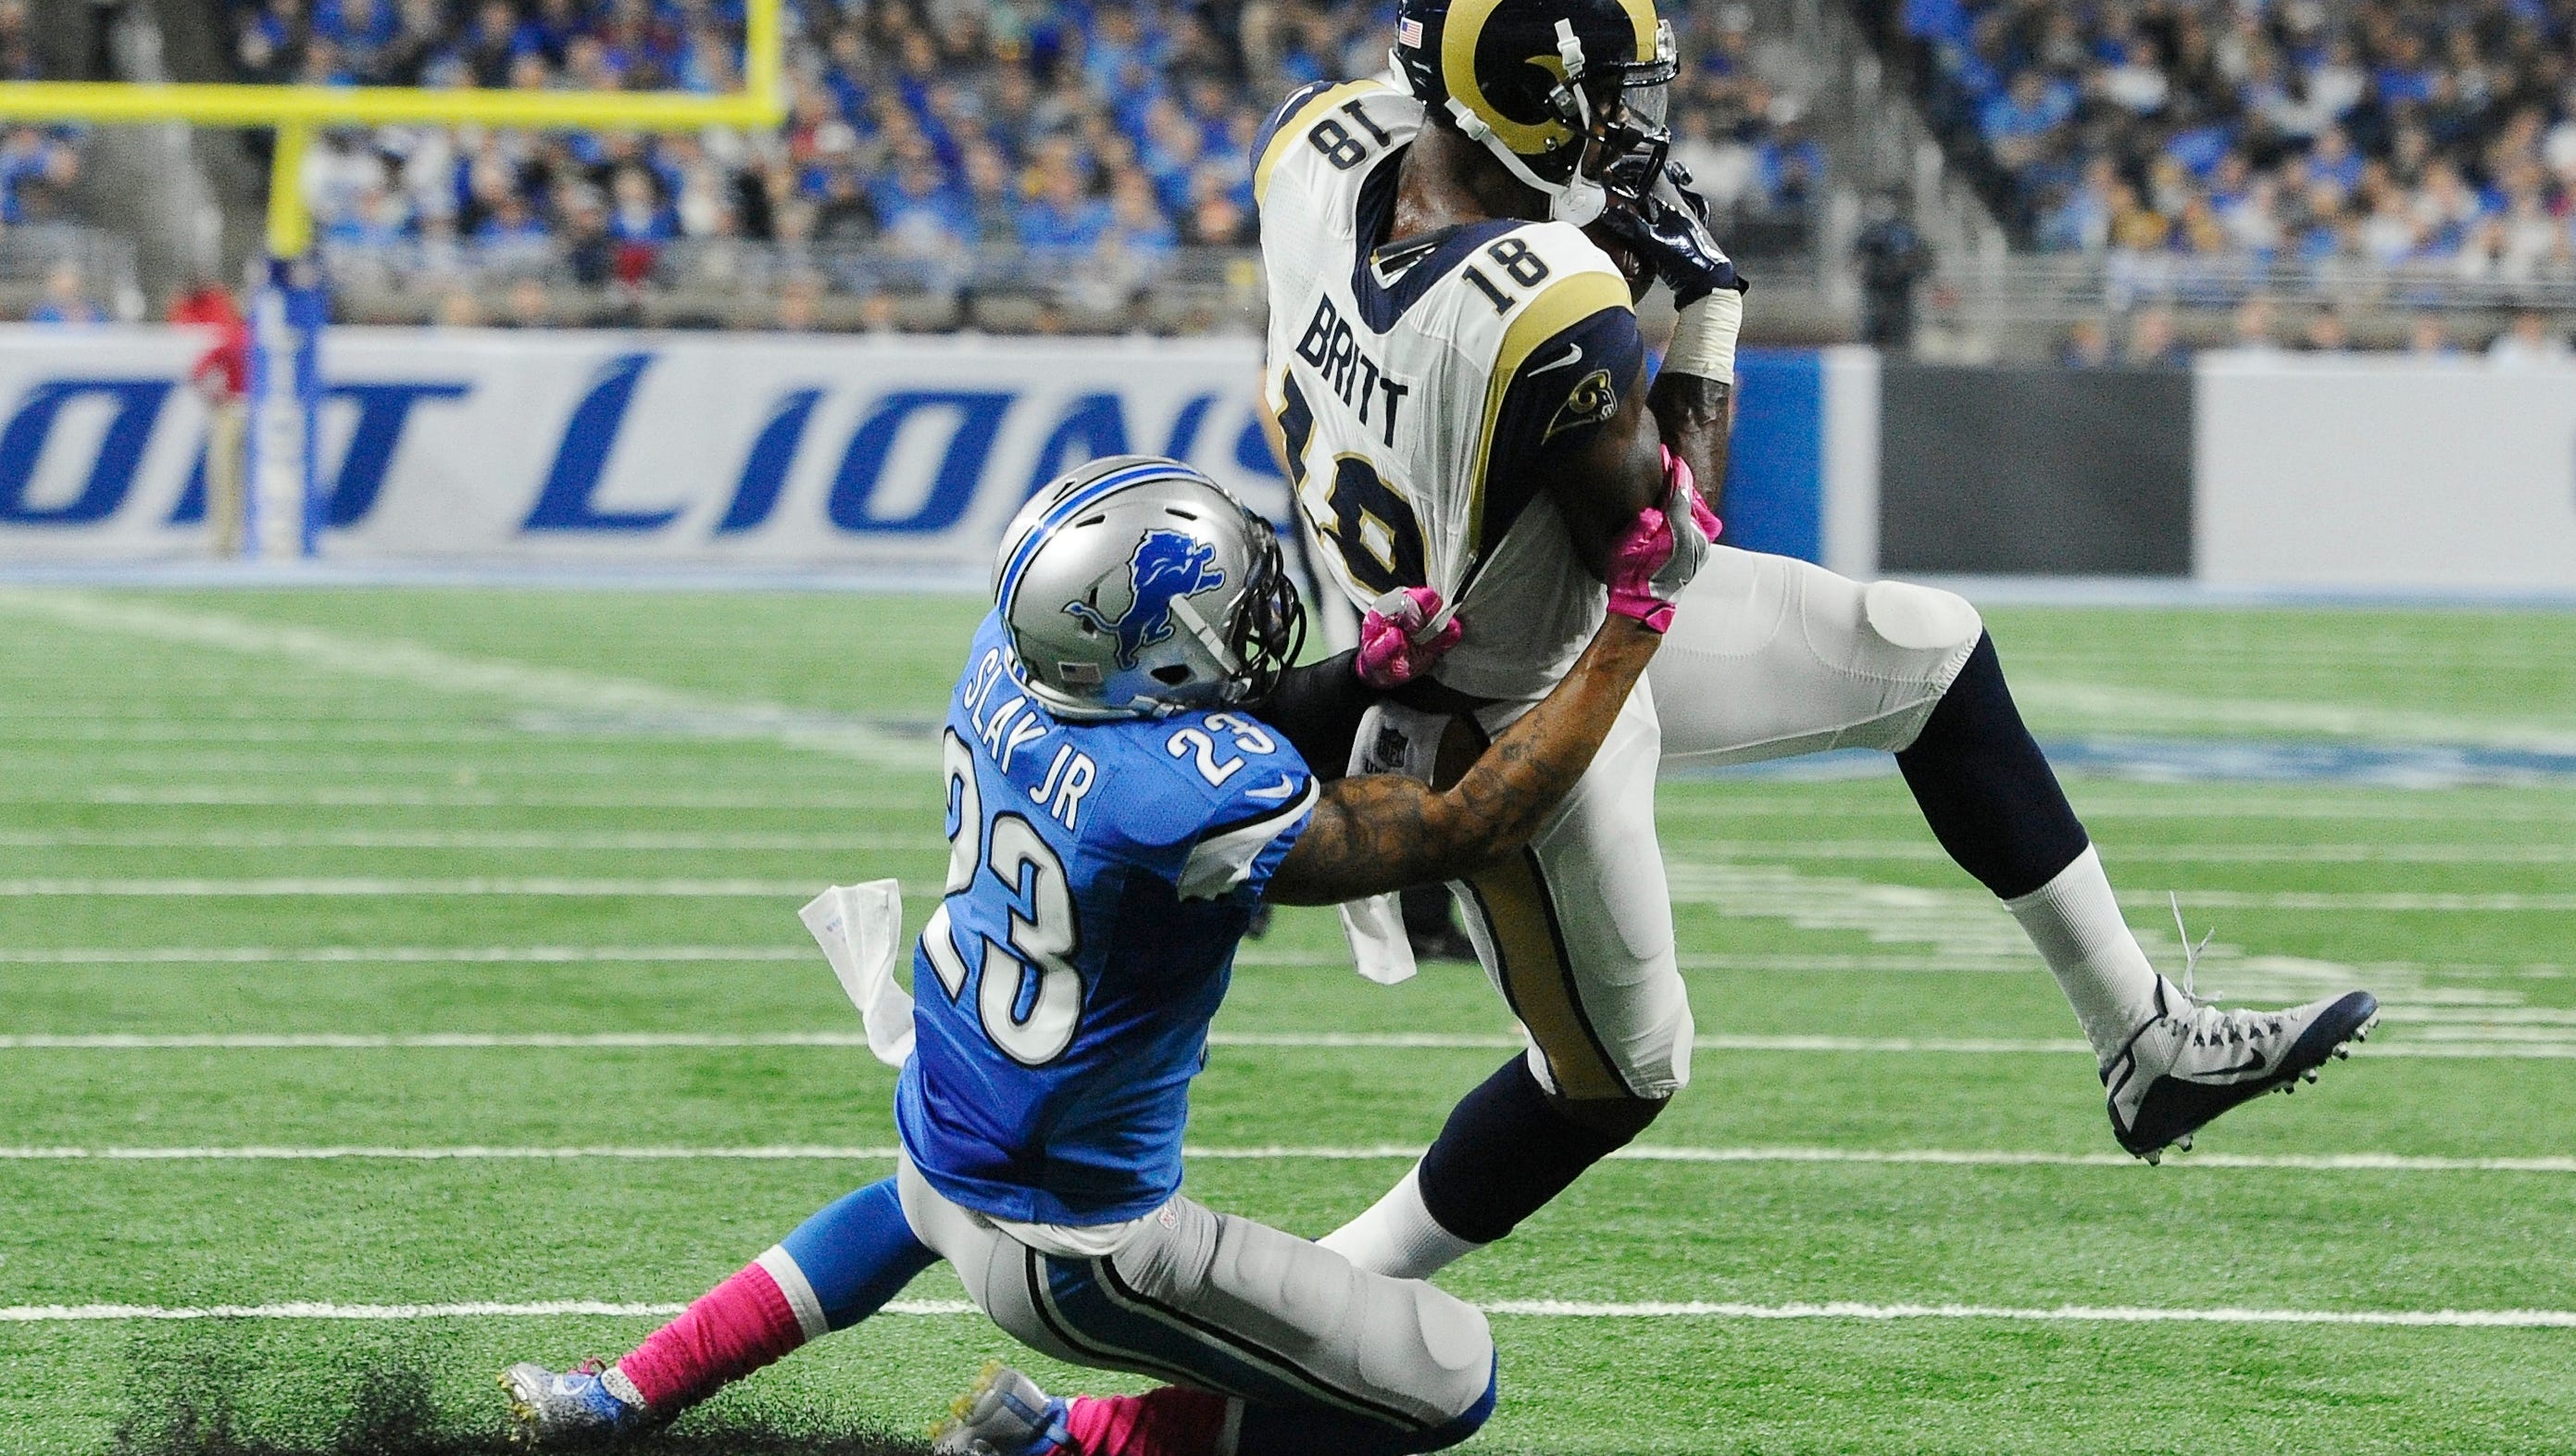 Rams wide receiver Kenny Britt pulls in a reception and is able to throw off Lions cornerback Darius Slay, going into the end zone for a touchdown in the fourth quarter.